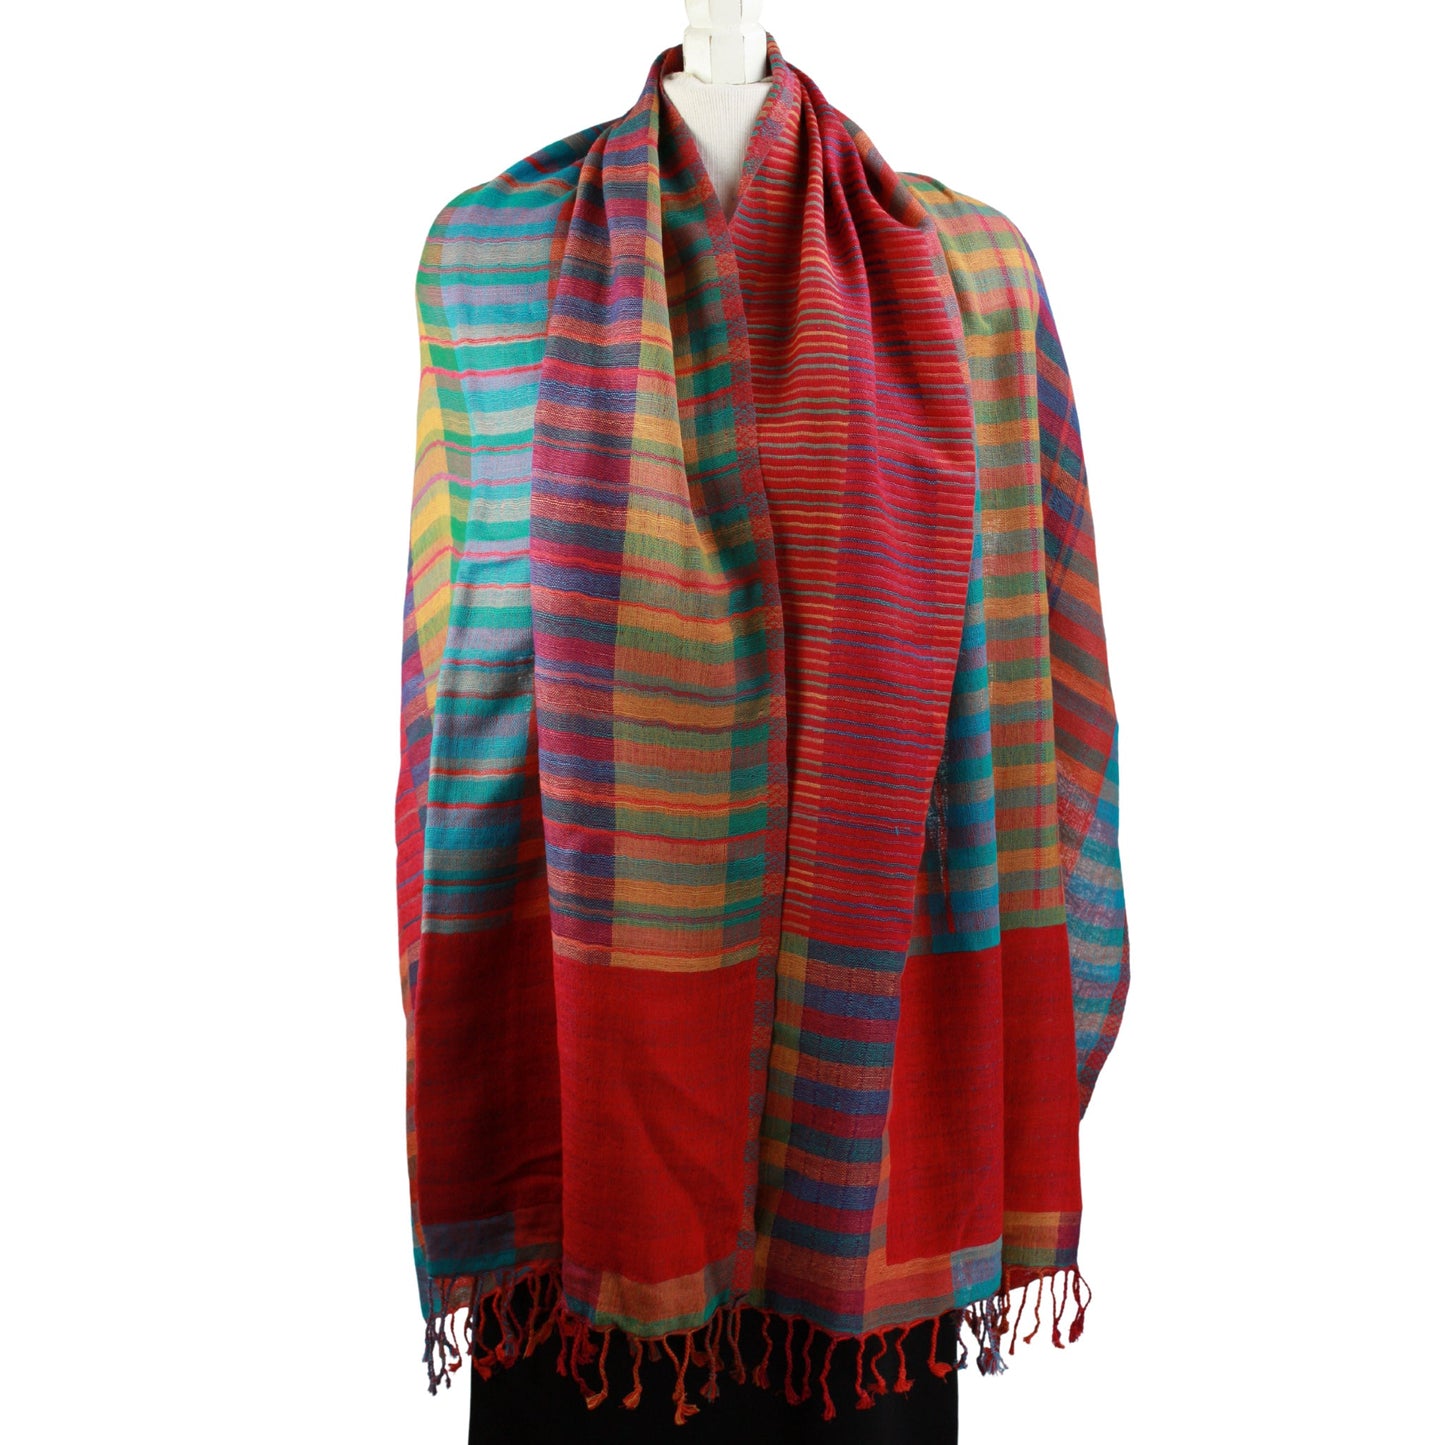 Kalya scarf in red, turquoise, purple and yellow